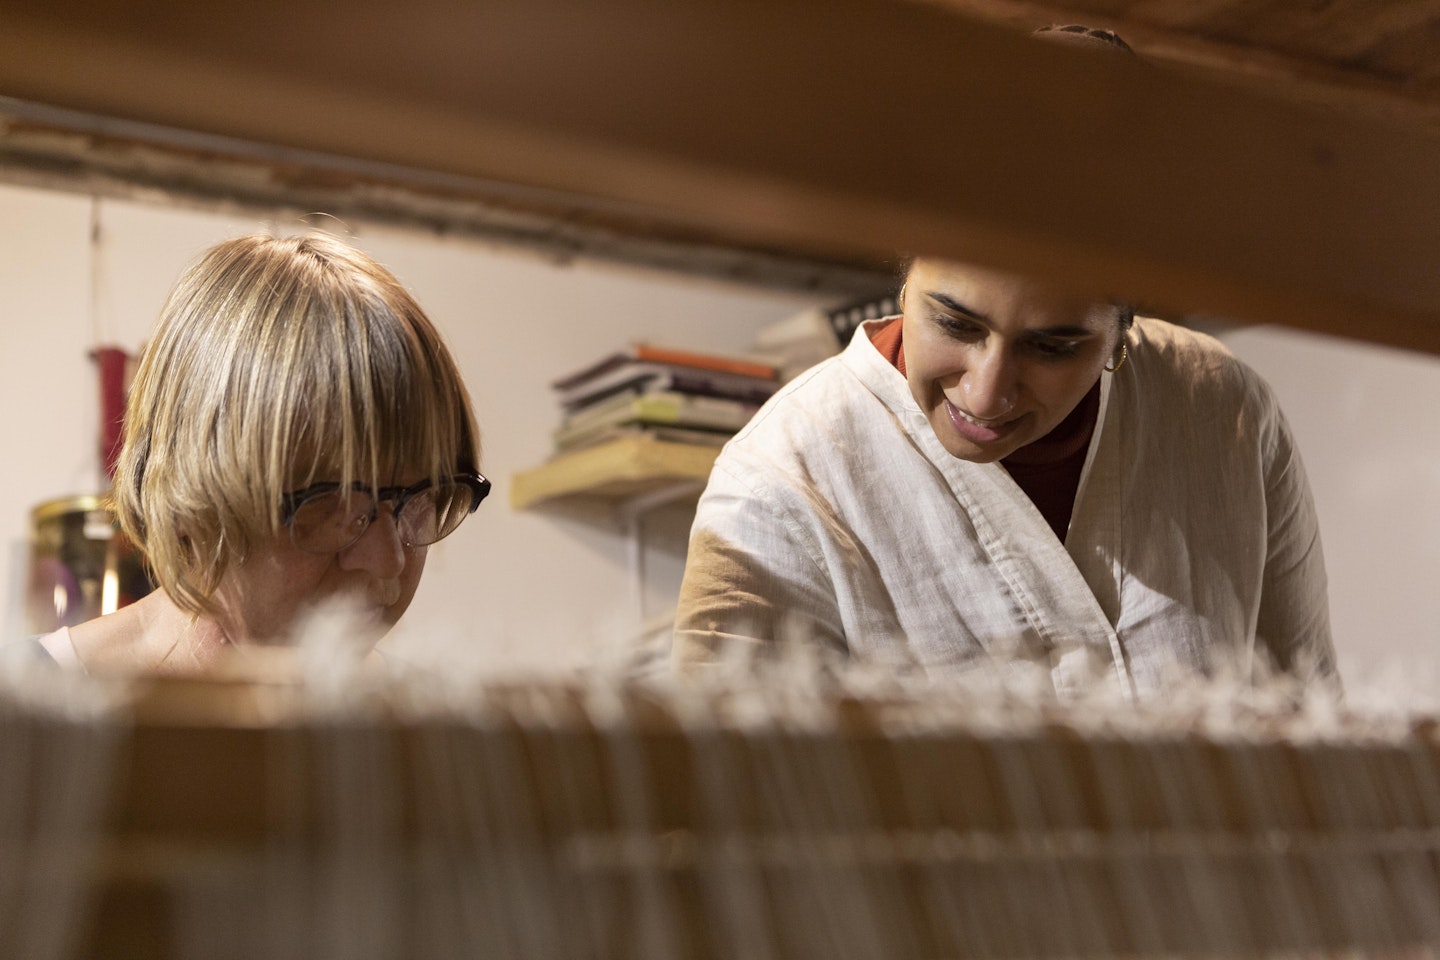 Sarah learning the art of handweaving with Ulrike in Spain